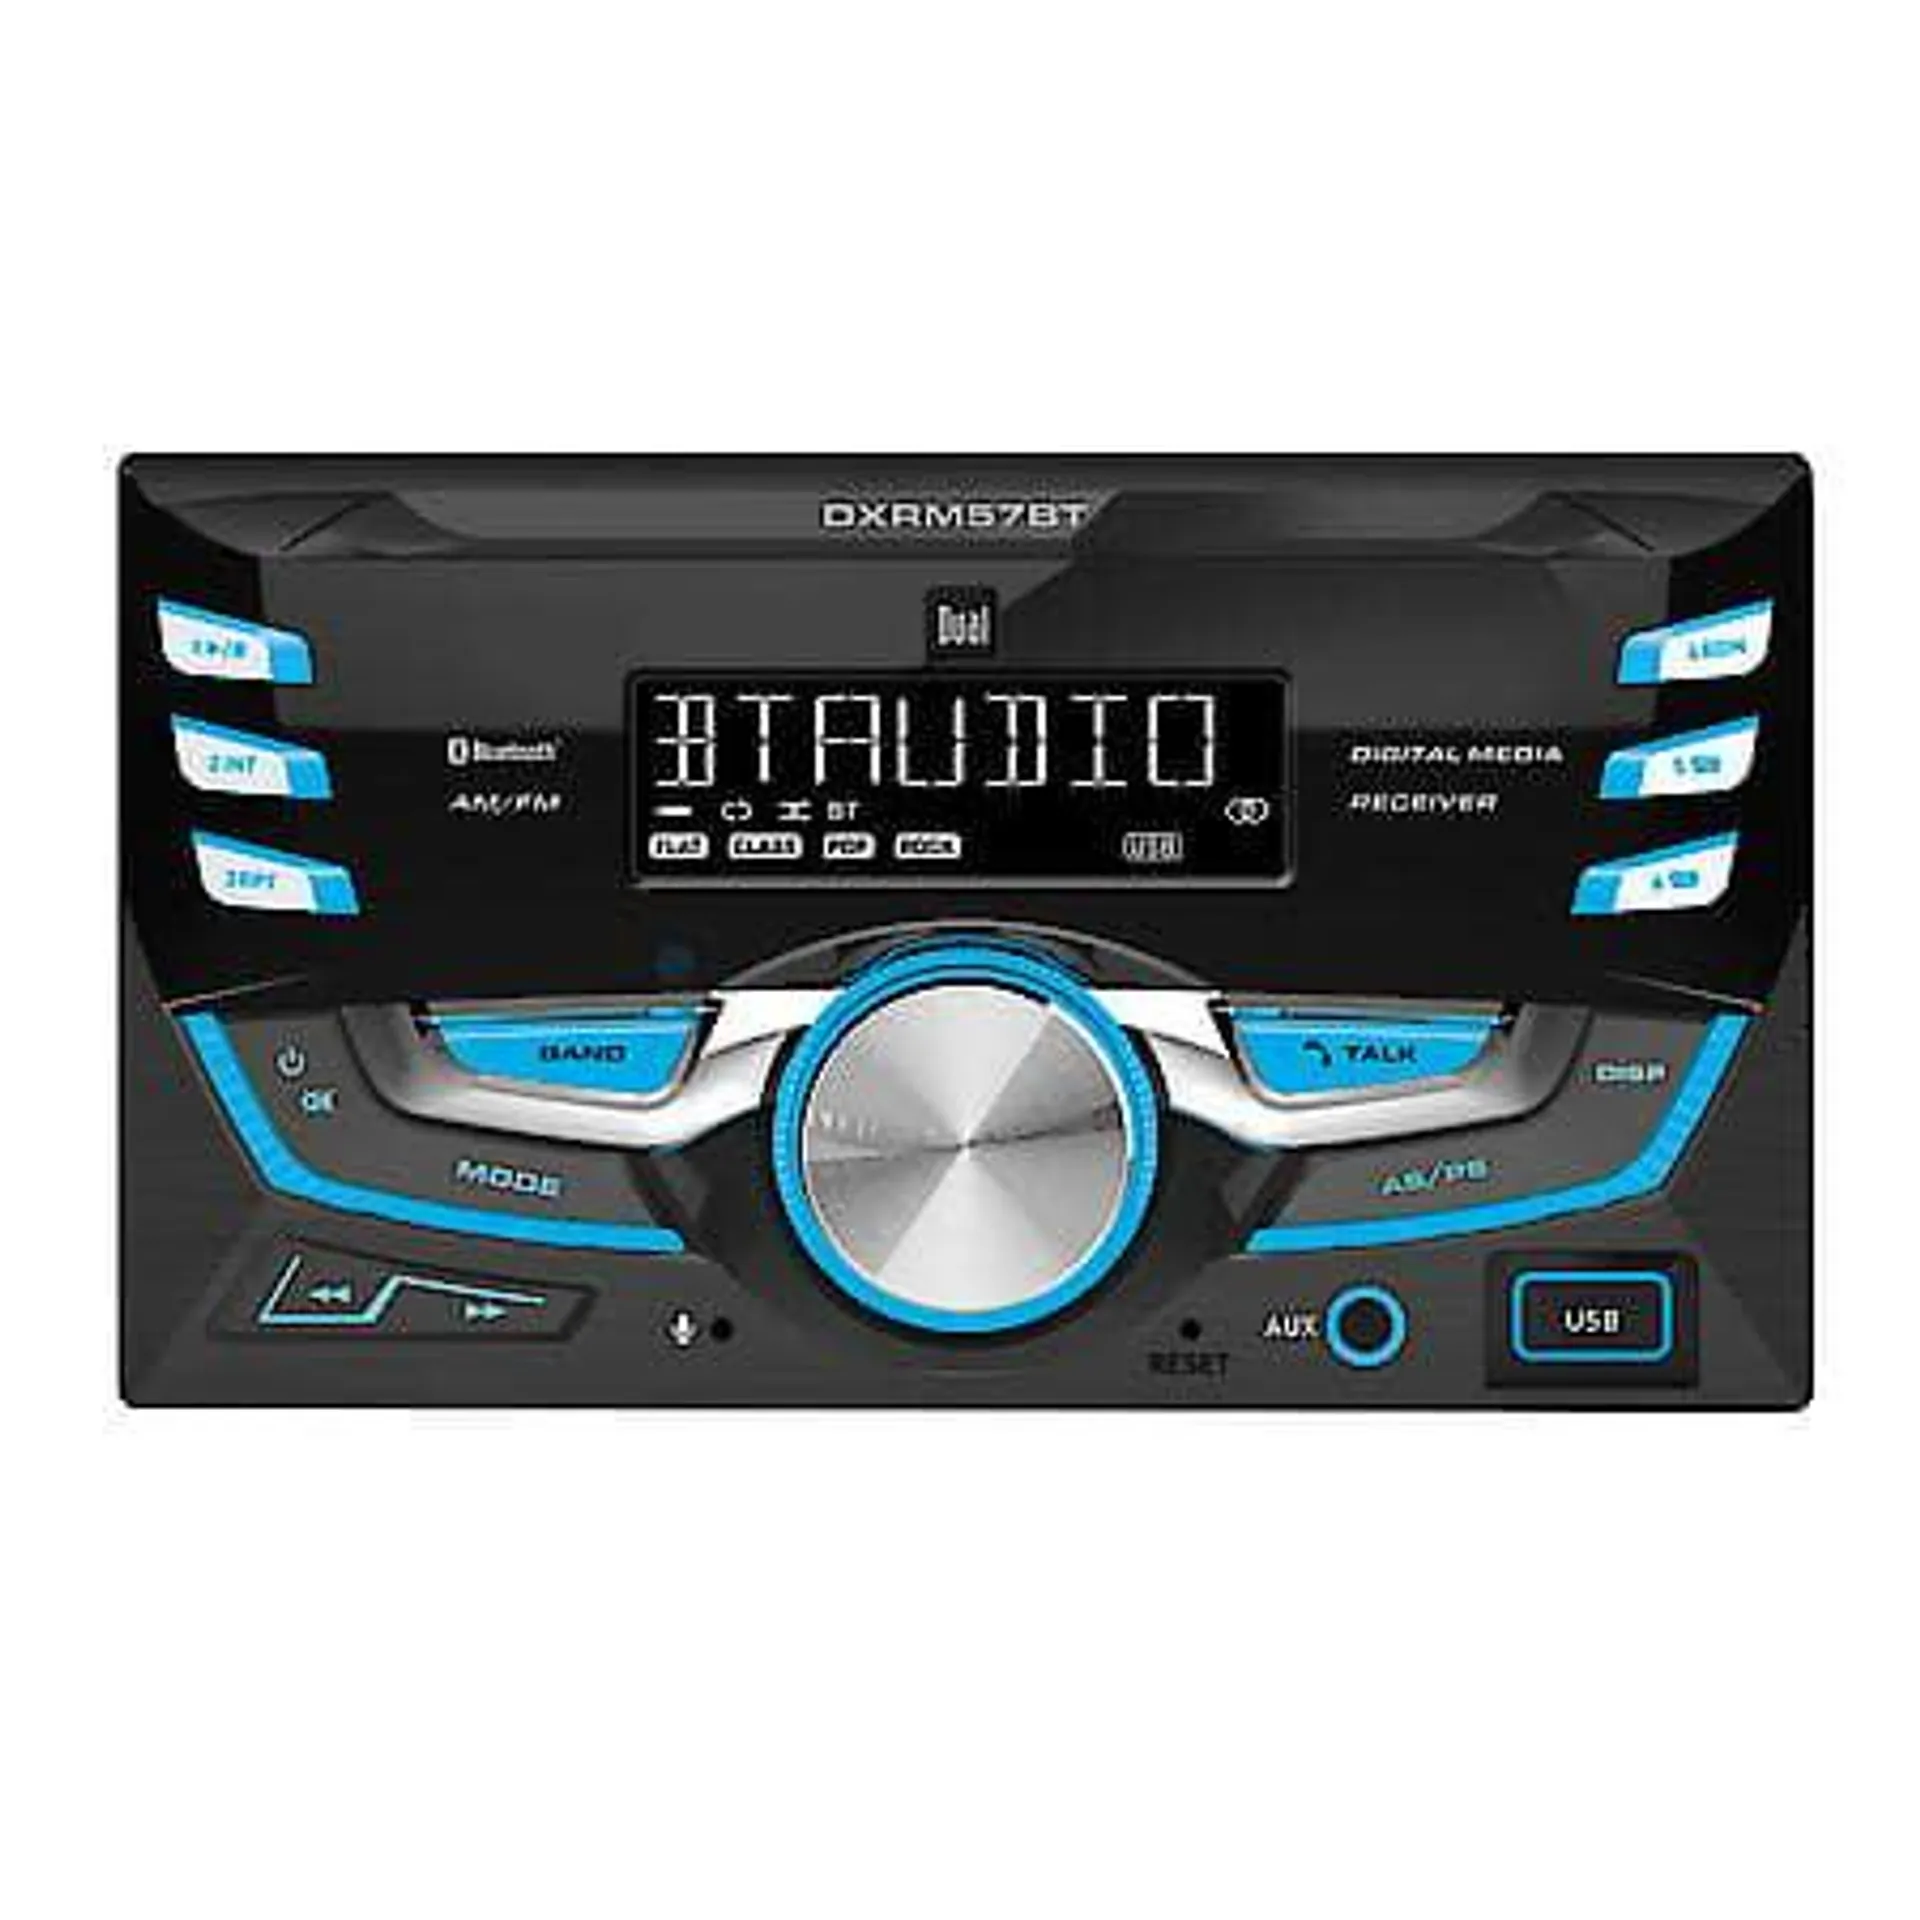 Double Din Car Stereo: Digital Media Player, Bluetooth, Music Streaming, Hands Free Calling